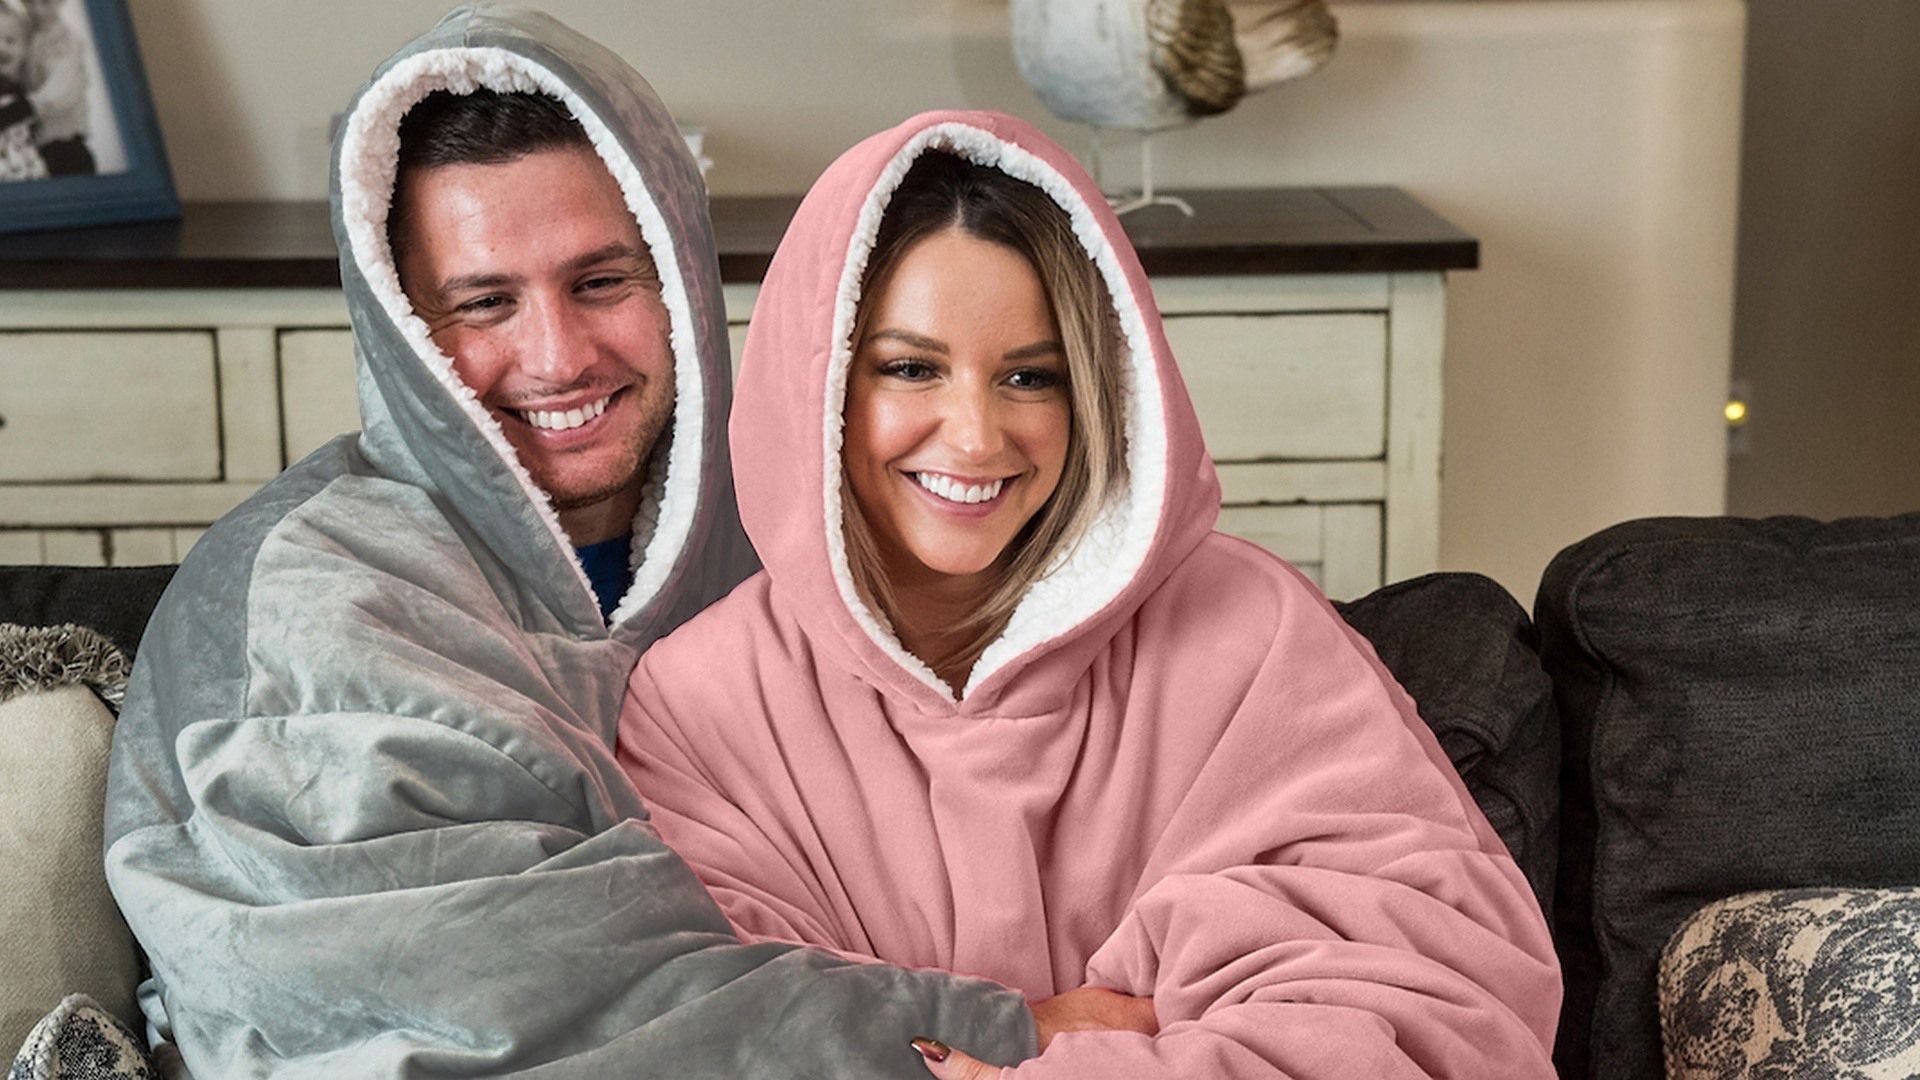 31 Comfort and Cozy Gift Ideas That Keep You Warm